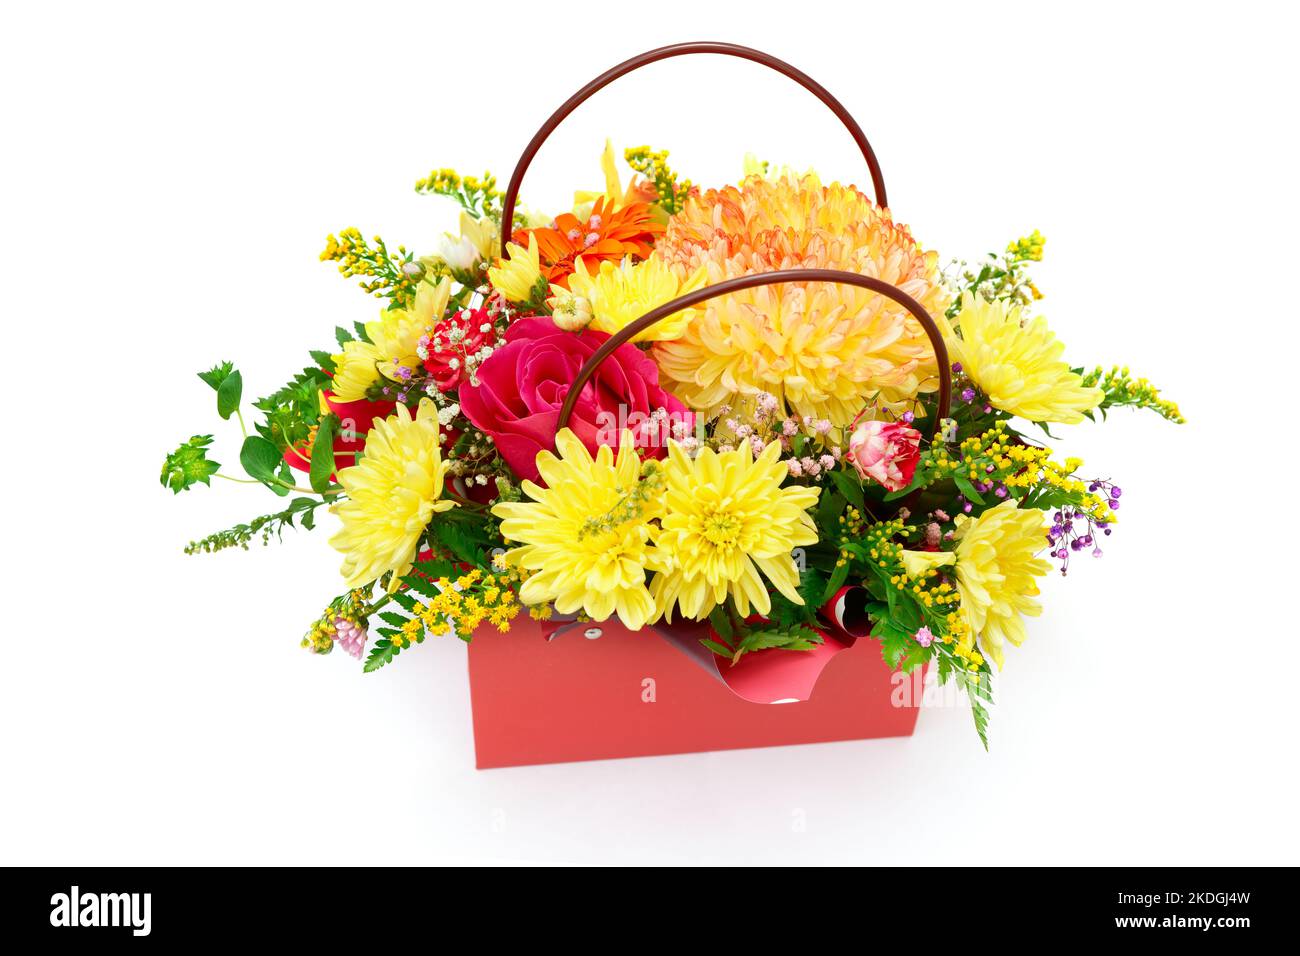 Bouquet of asters, chrysanthemum and roses in red bag shot on white background Stock Photo